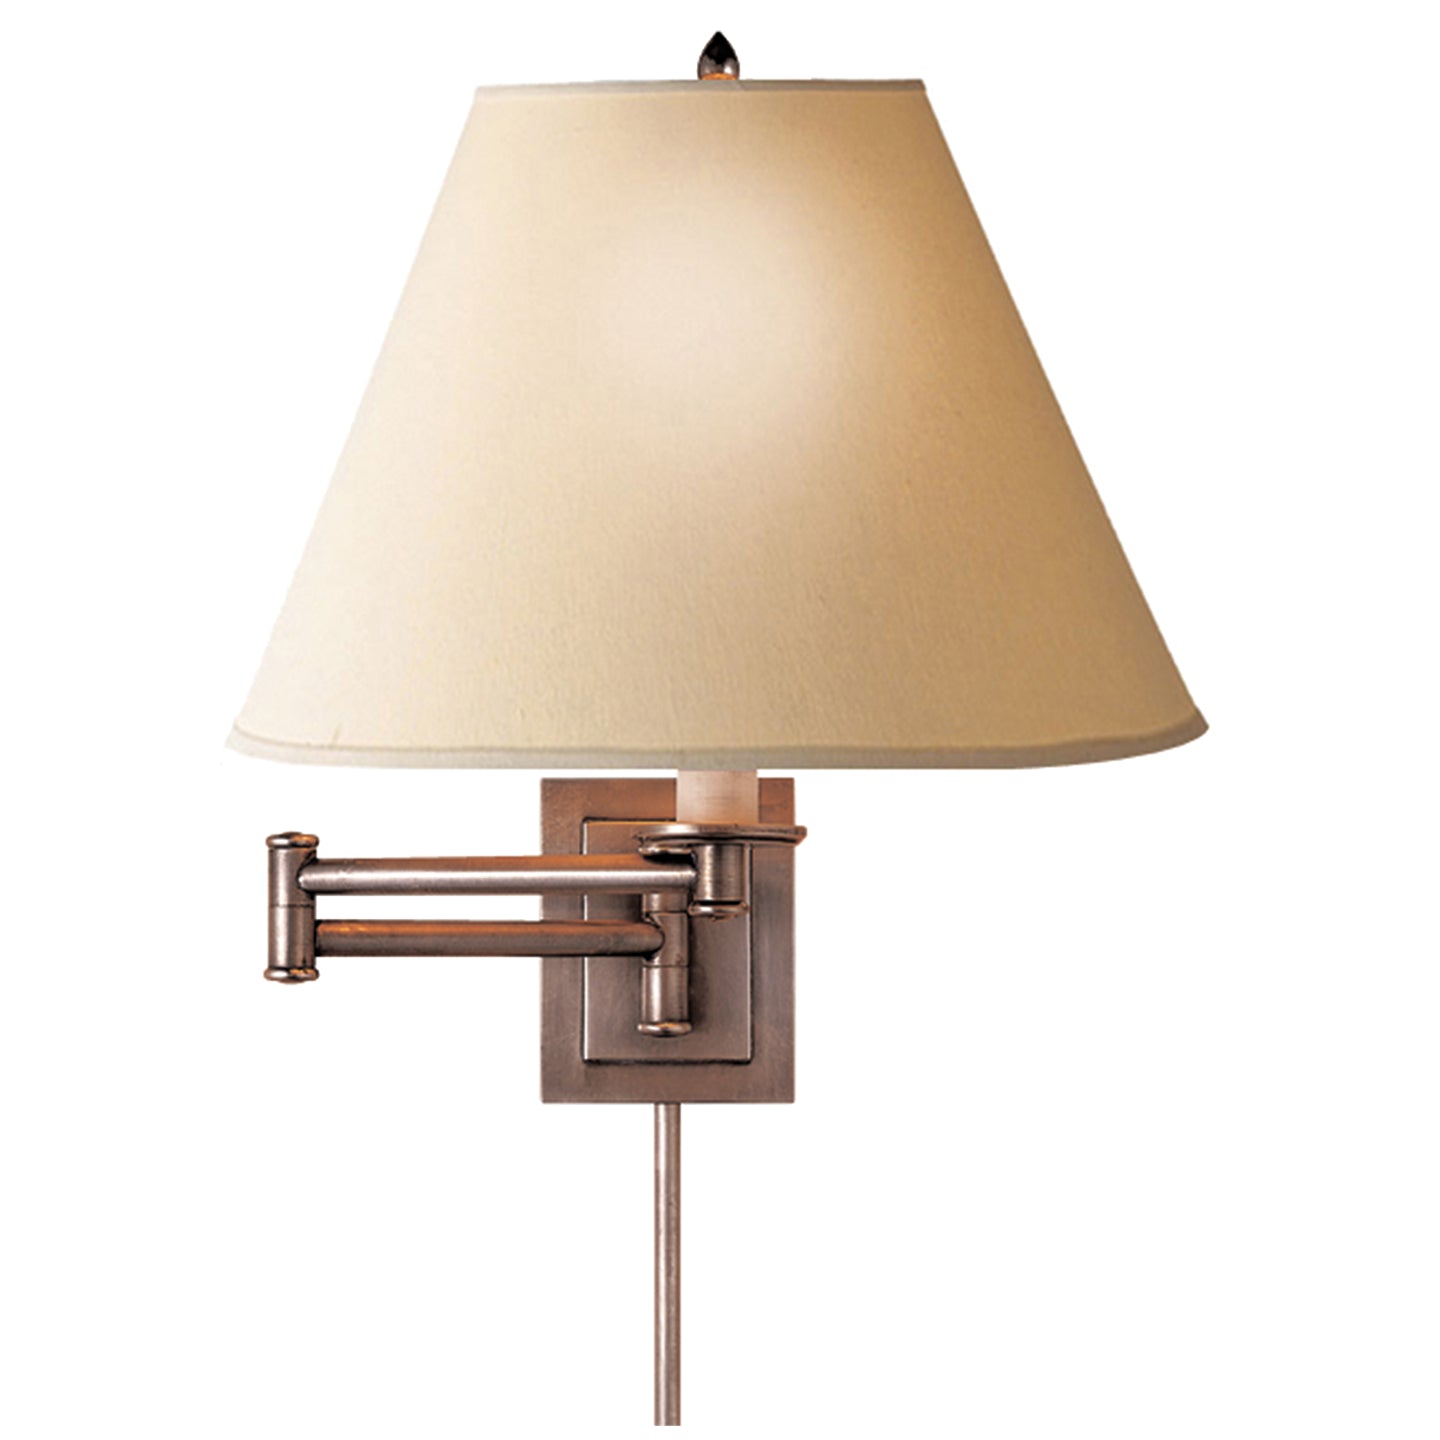 Load image into Gallery viewer, Visual Comfort Signature - S 2500AN-L - One Light Swing Arm Wall Lamp - Primitive - Antique Nickel
